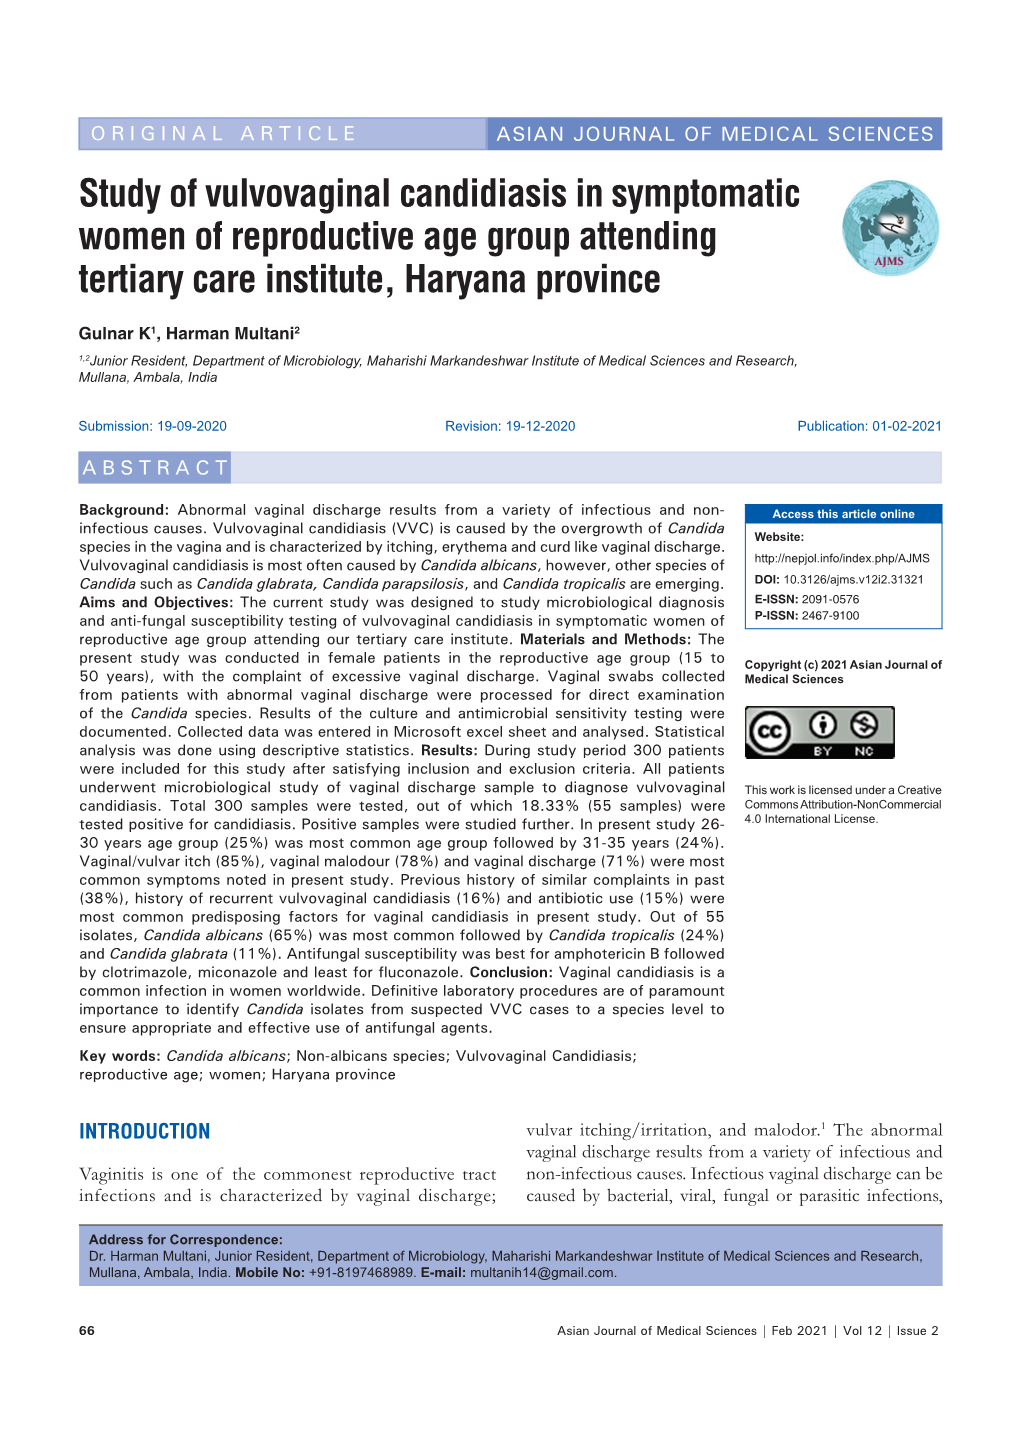 Study of Vulvovaginal Candidiasis in Symptomatic Women of Reproductive Age Group Attending Tertiary Care Institute, Haryana Province